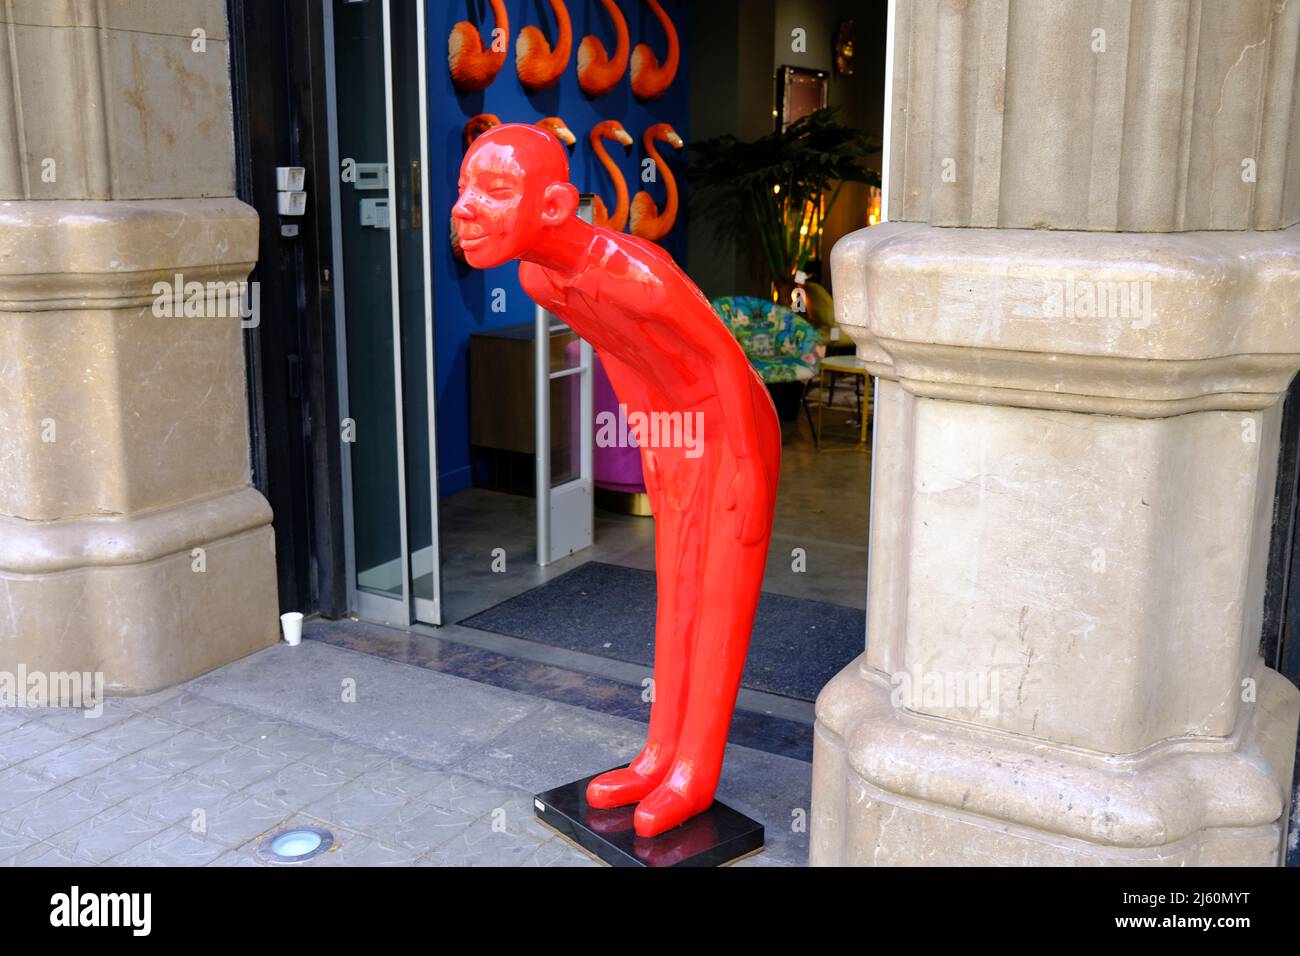 A bowing man in front of Kare Shop in Barcelona, Spain Stock Photo